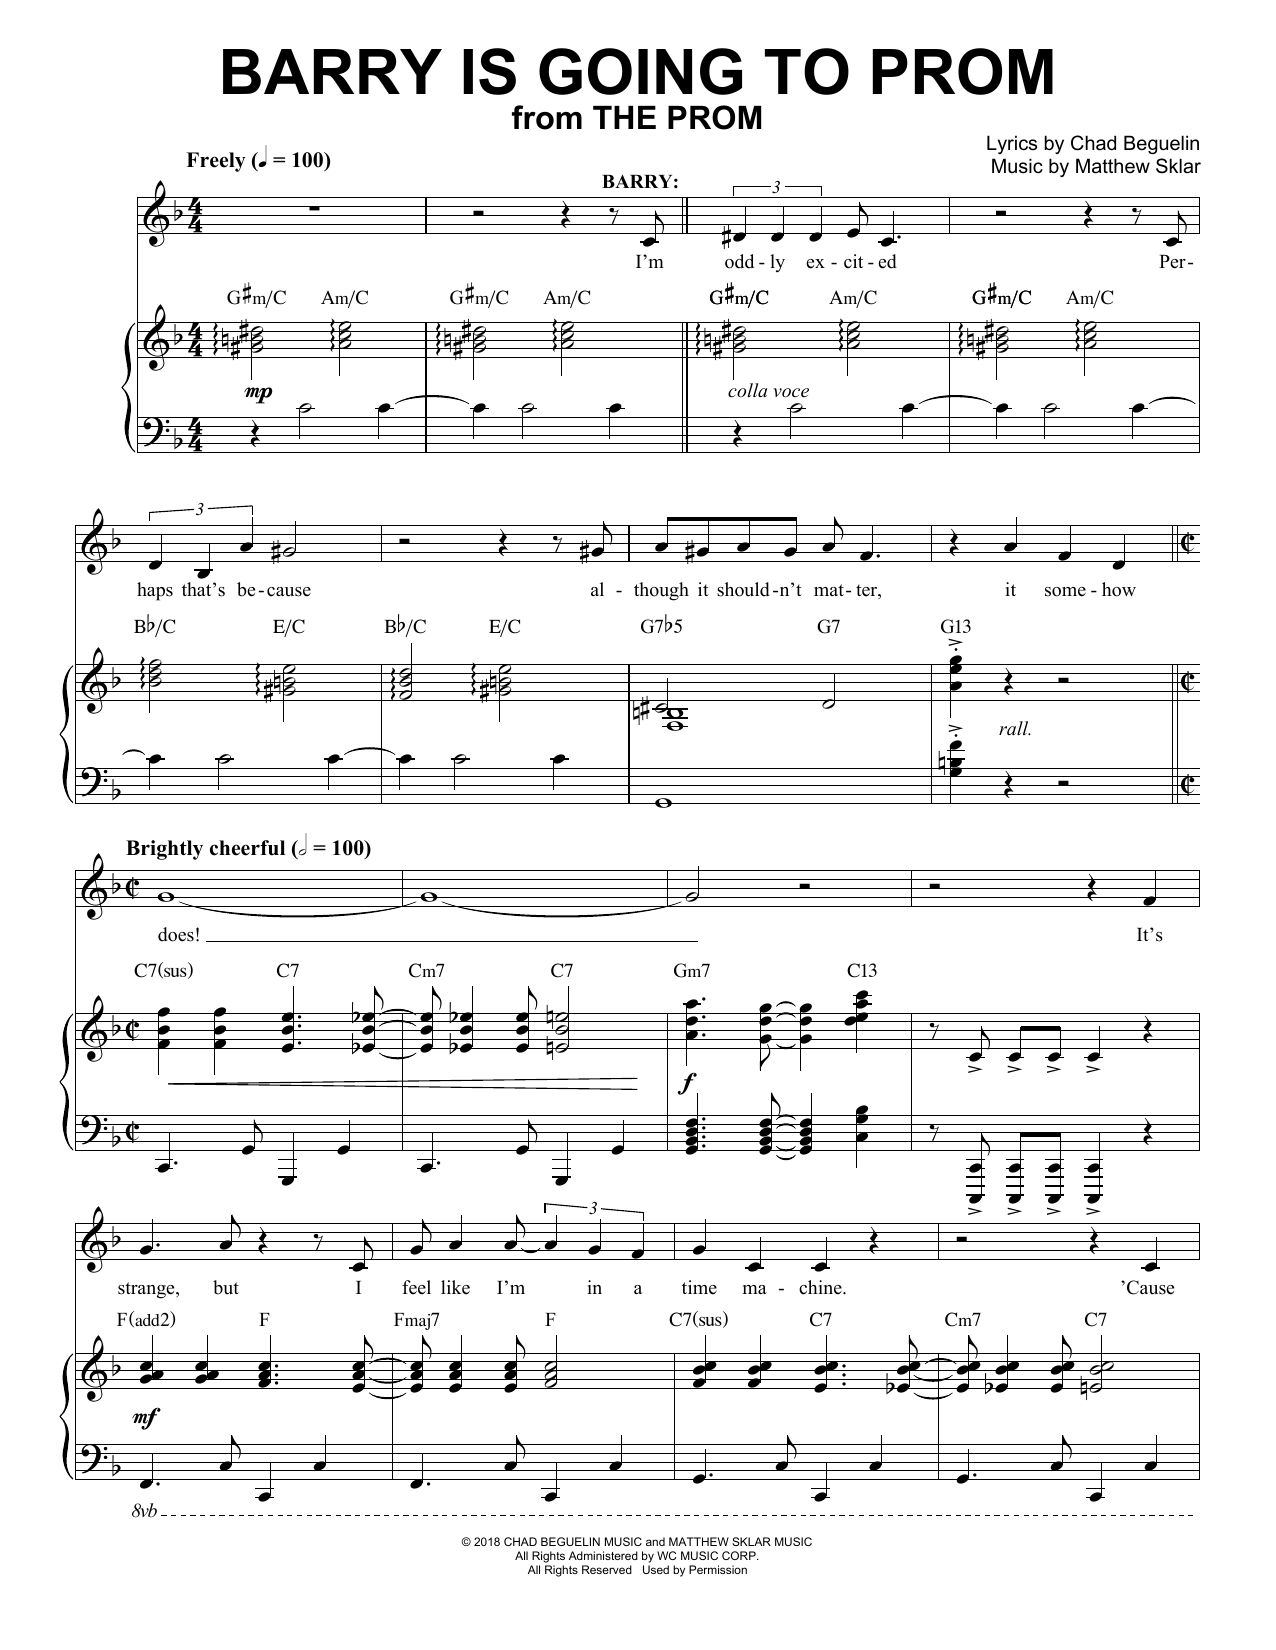 Download Matthew Sklar & Chad Beguelin Barry Is Going To Prom (from The Prom: Sheet Music